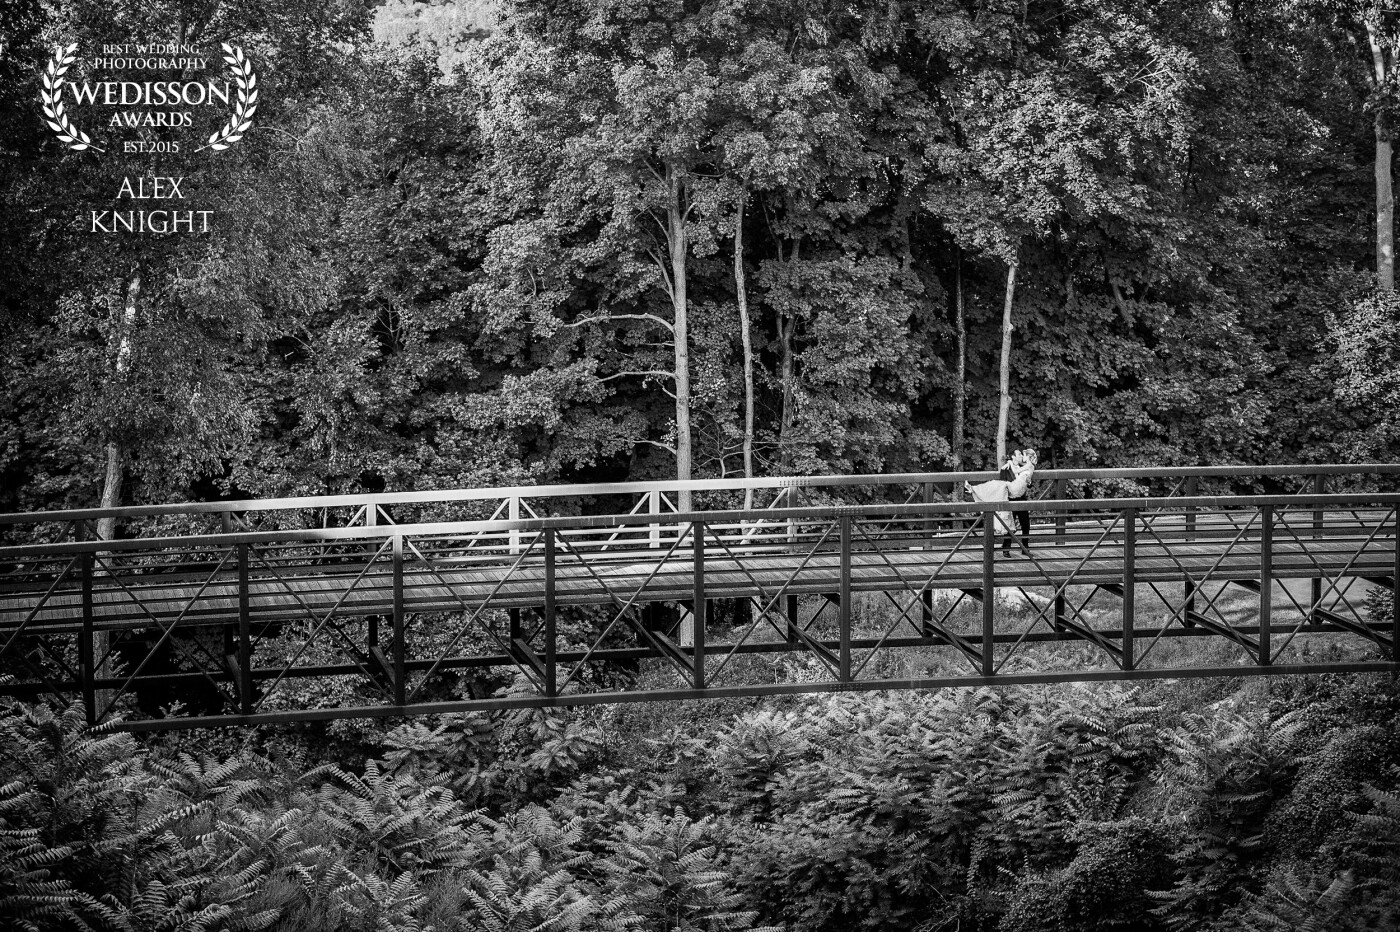 Sometimes you never know what you'll find unless you venture out into the unknown. That's how this image was captured. A short walk along a path near the wedding venue we found this bridge and this is what we got. Classic and timeless; just like the love shared between the couple.